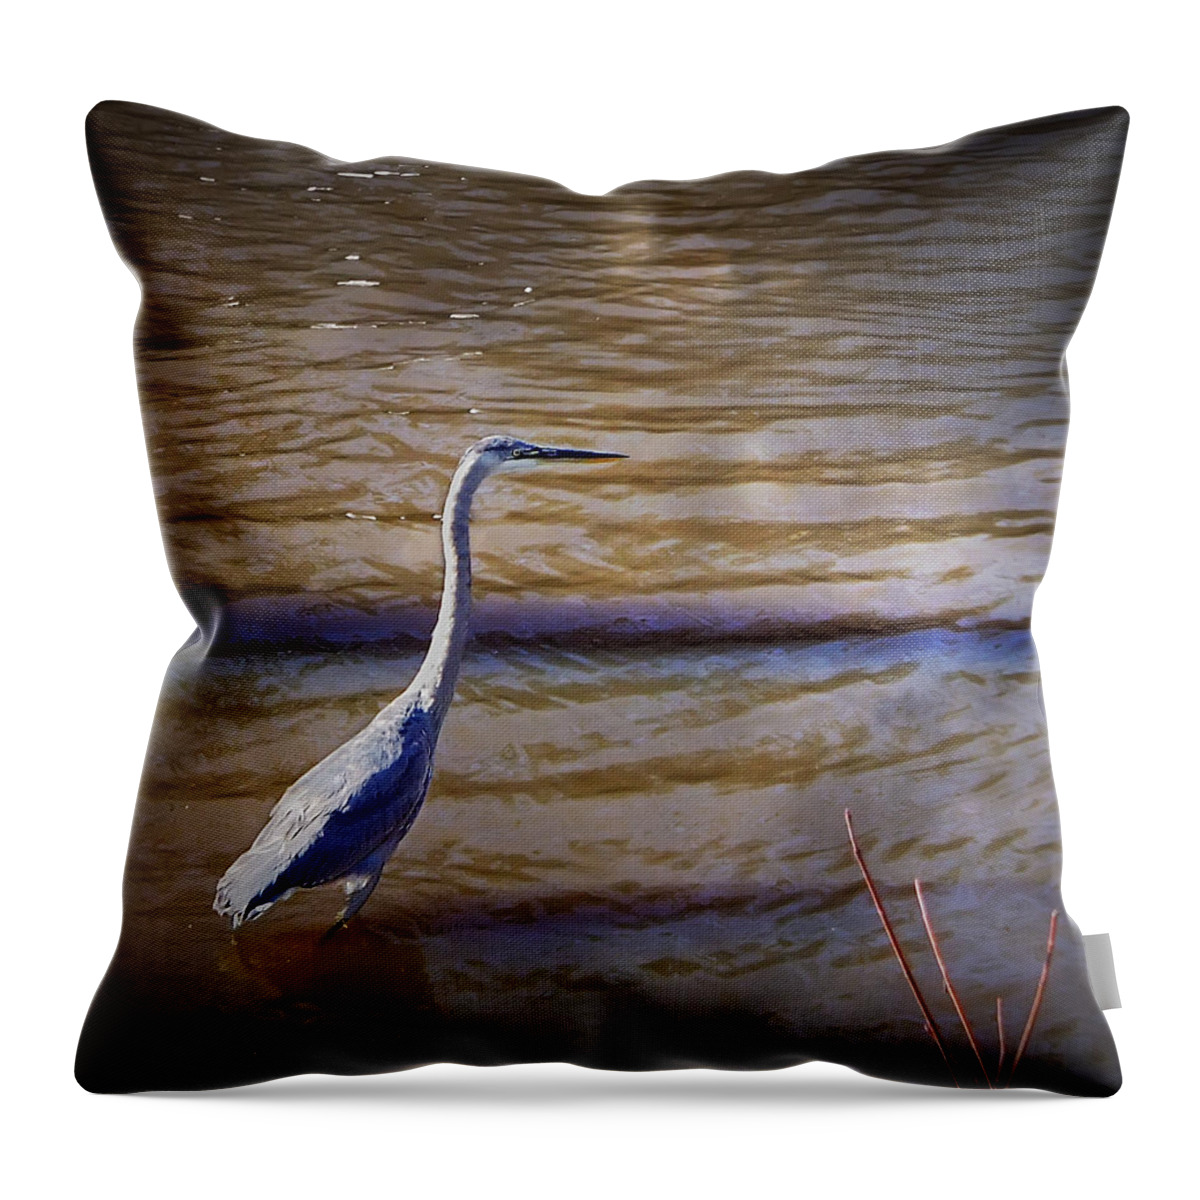 2d Throw Pillow featuring the photograph Blue Heron - Shallow Water by Brian Wallace